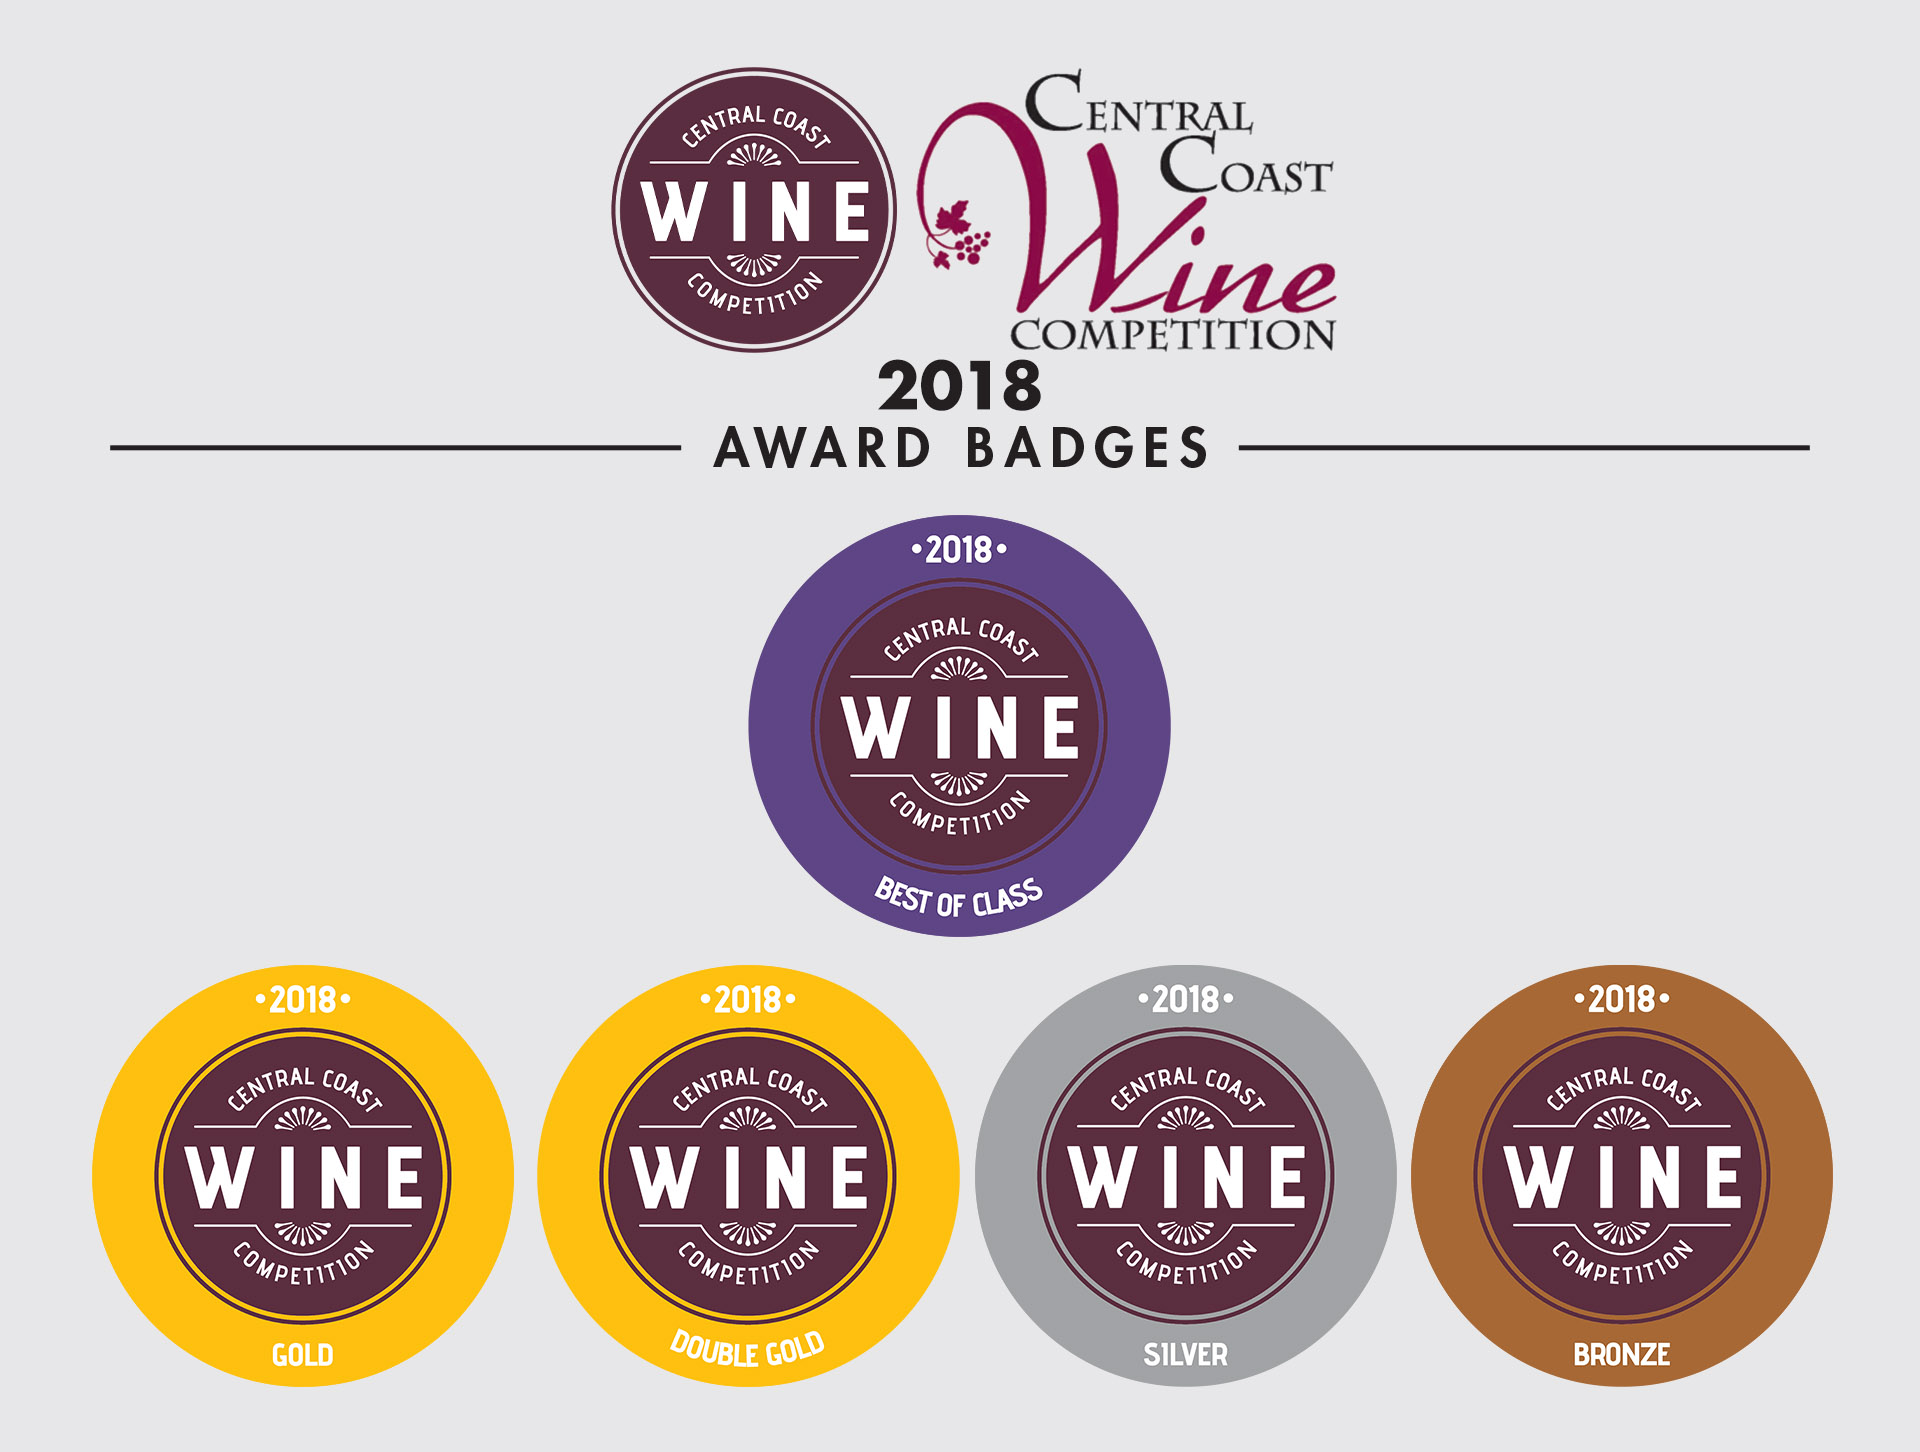 Contra Costa Wine Competition Awards 2018